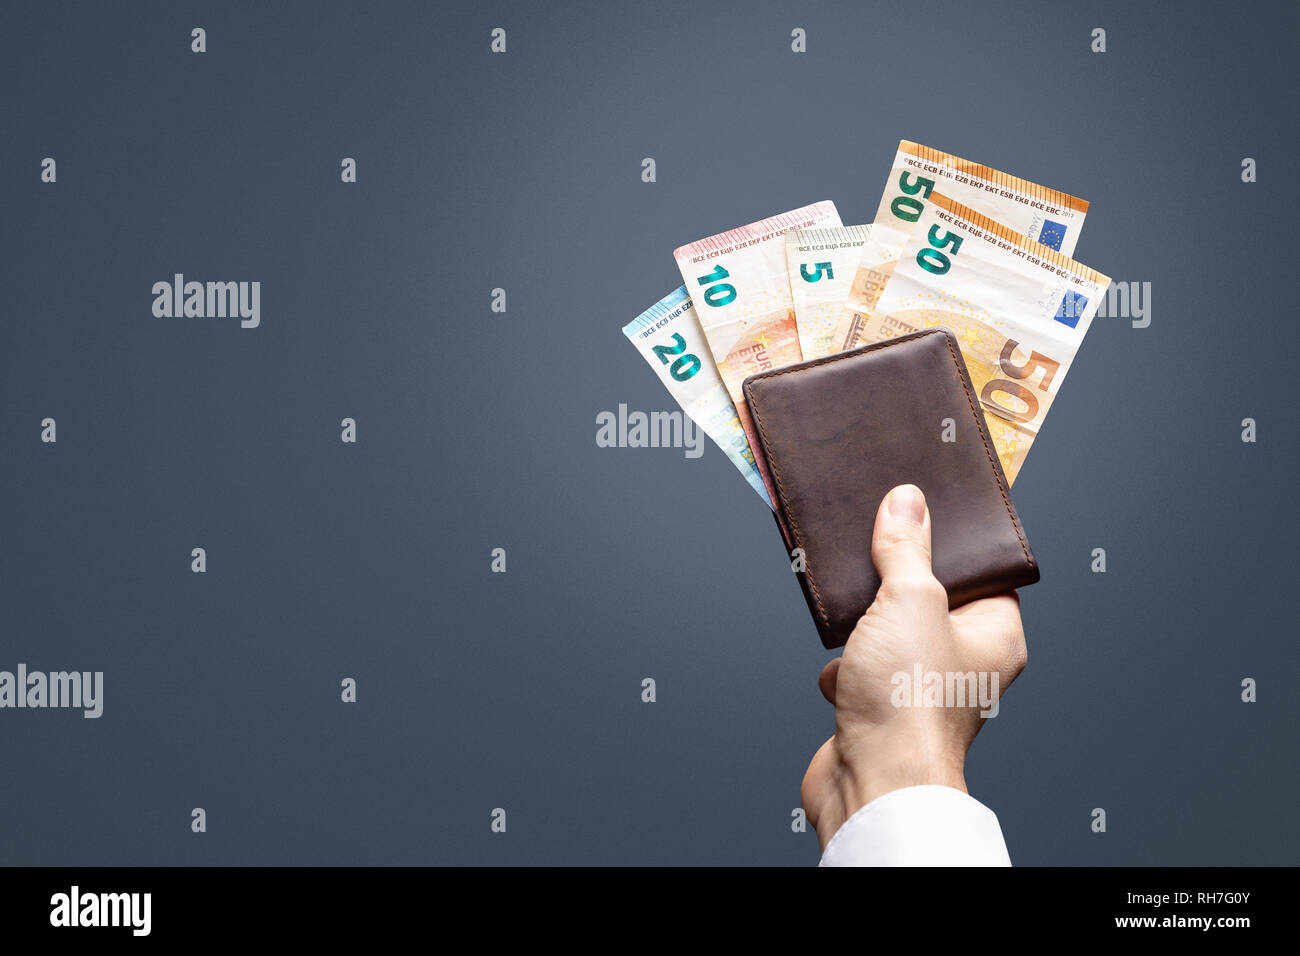 Several Euro banknotes sticking out of a wallet Stock Photo